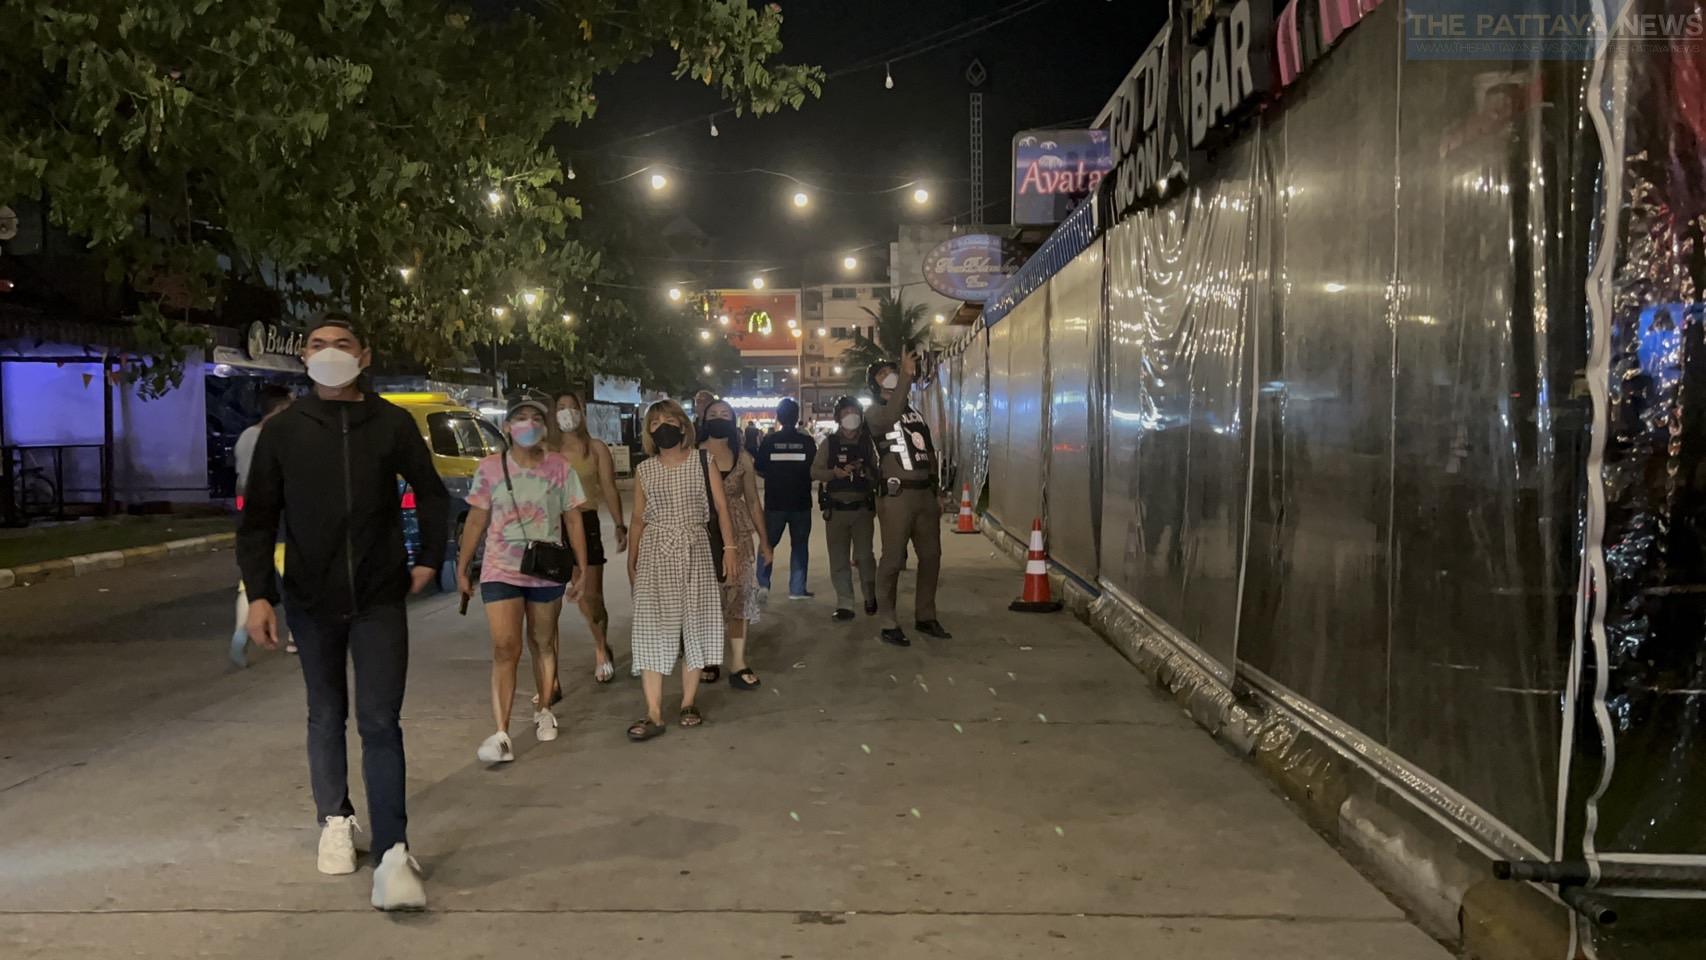 Pattaya police strictly enforce venues open after legal midnight closing times for alcohol serving, Alcohol ban Sunday due to religious holiday this weekend